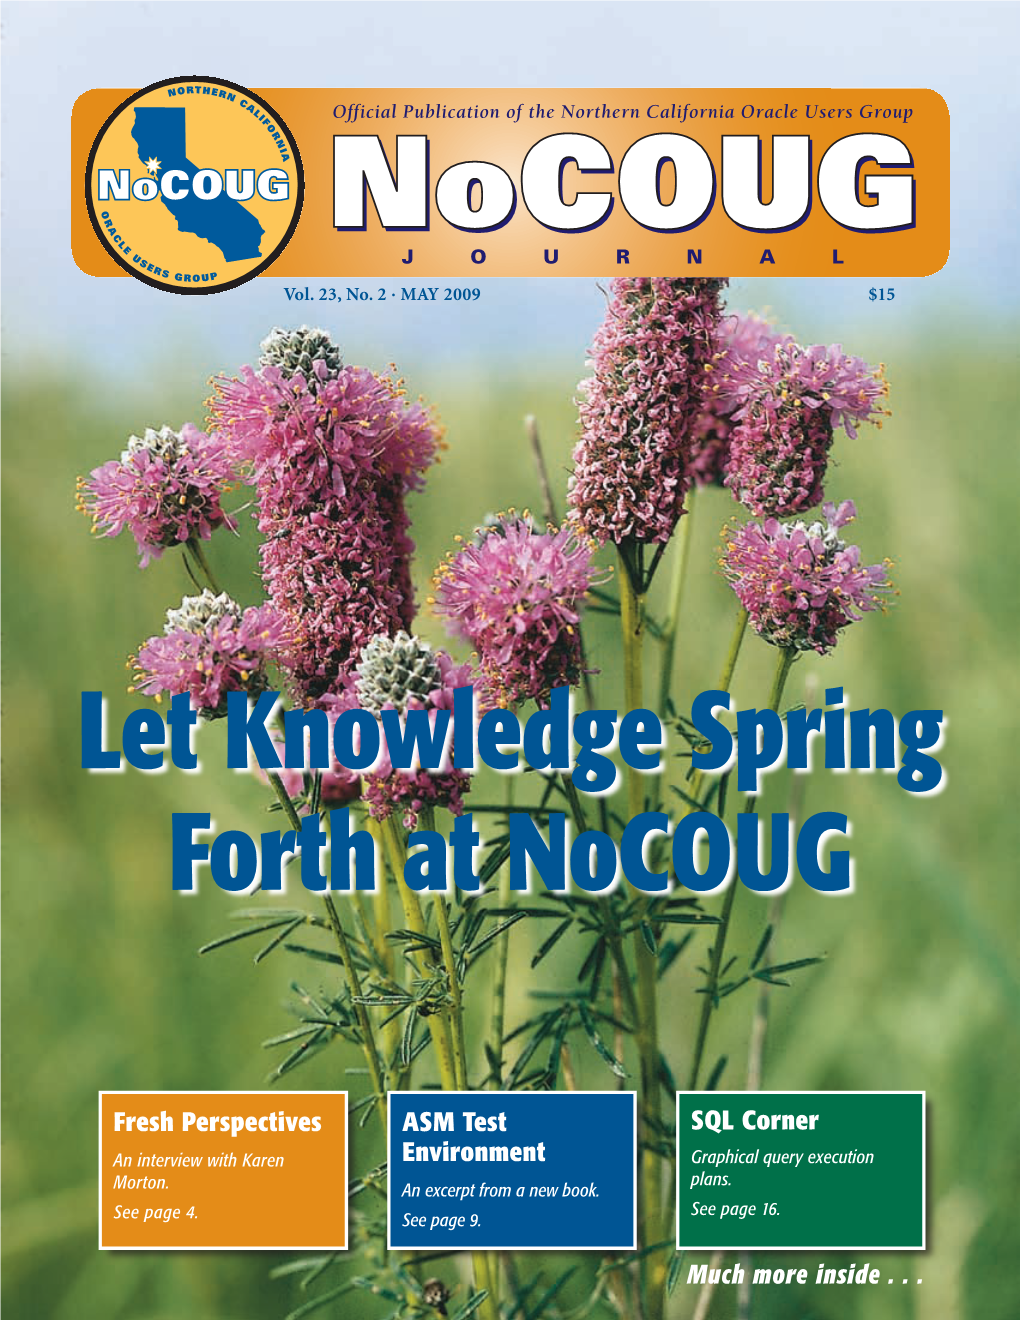 Let Knowledge Spring Forth at Nocoug